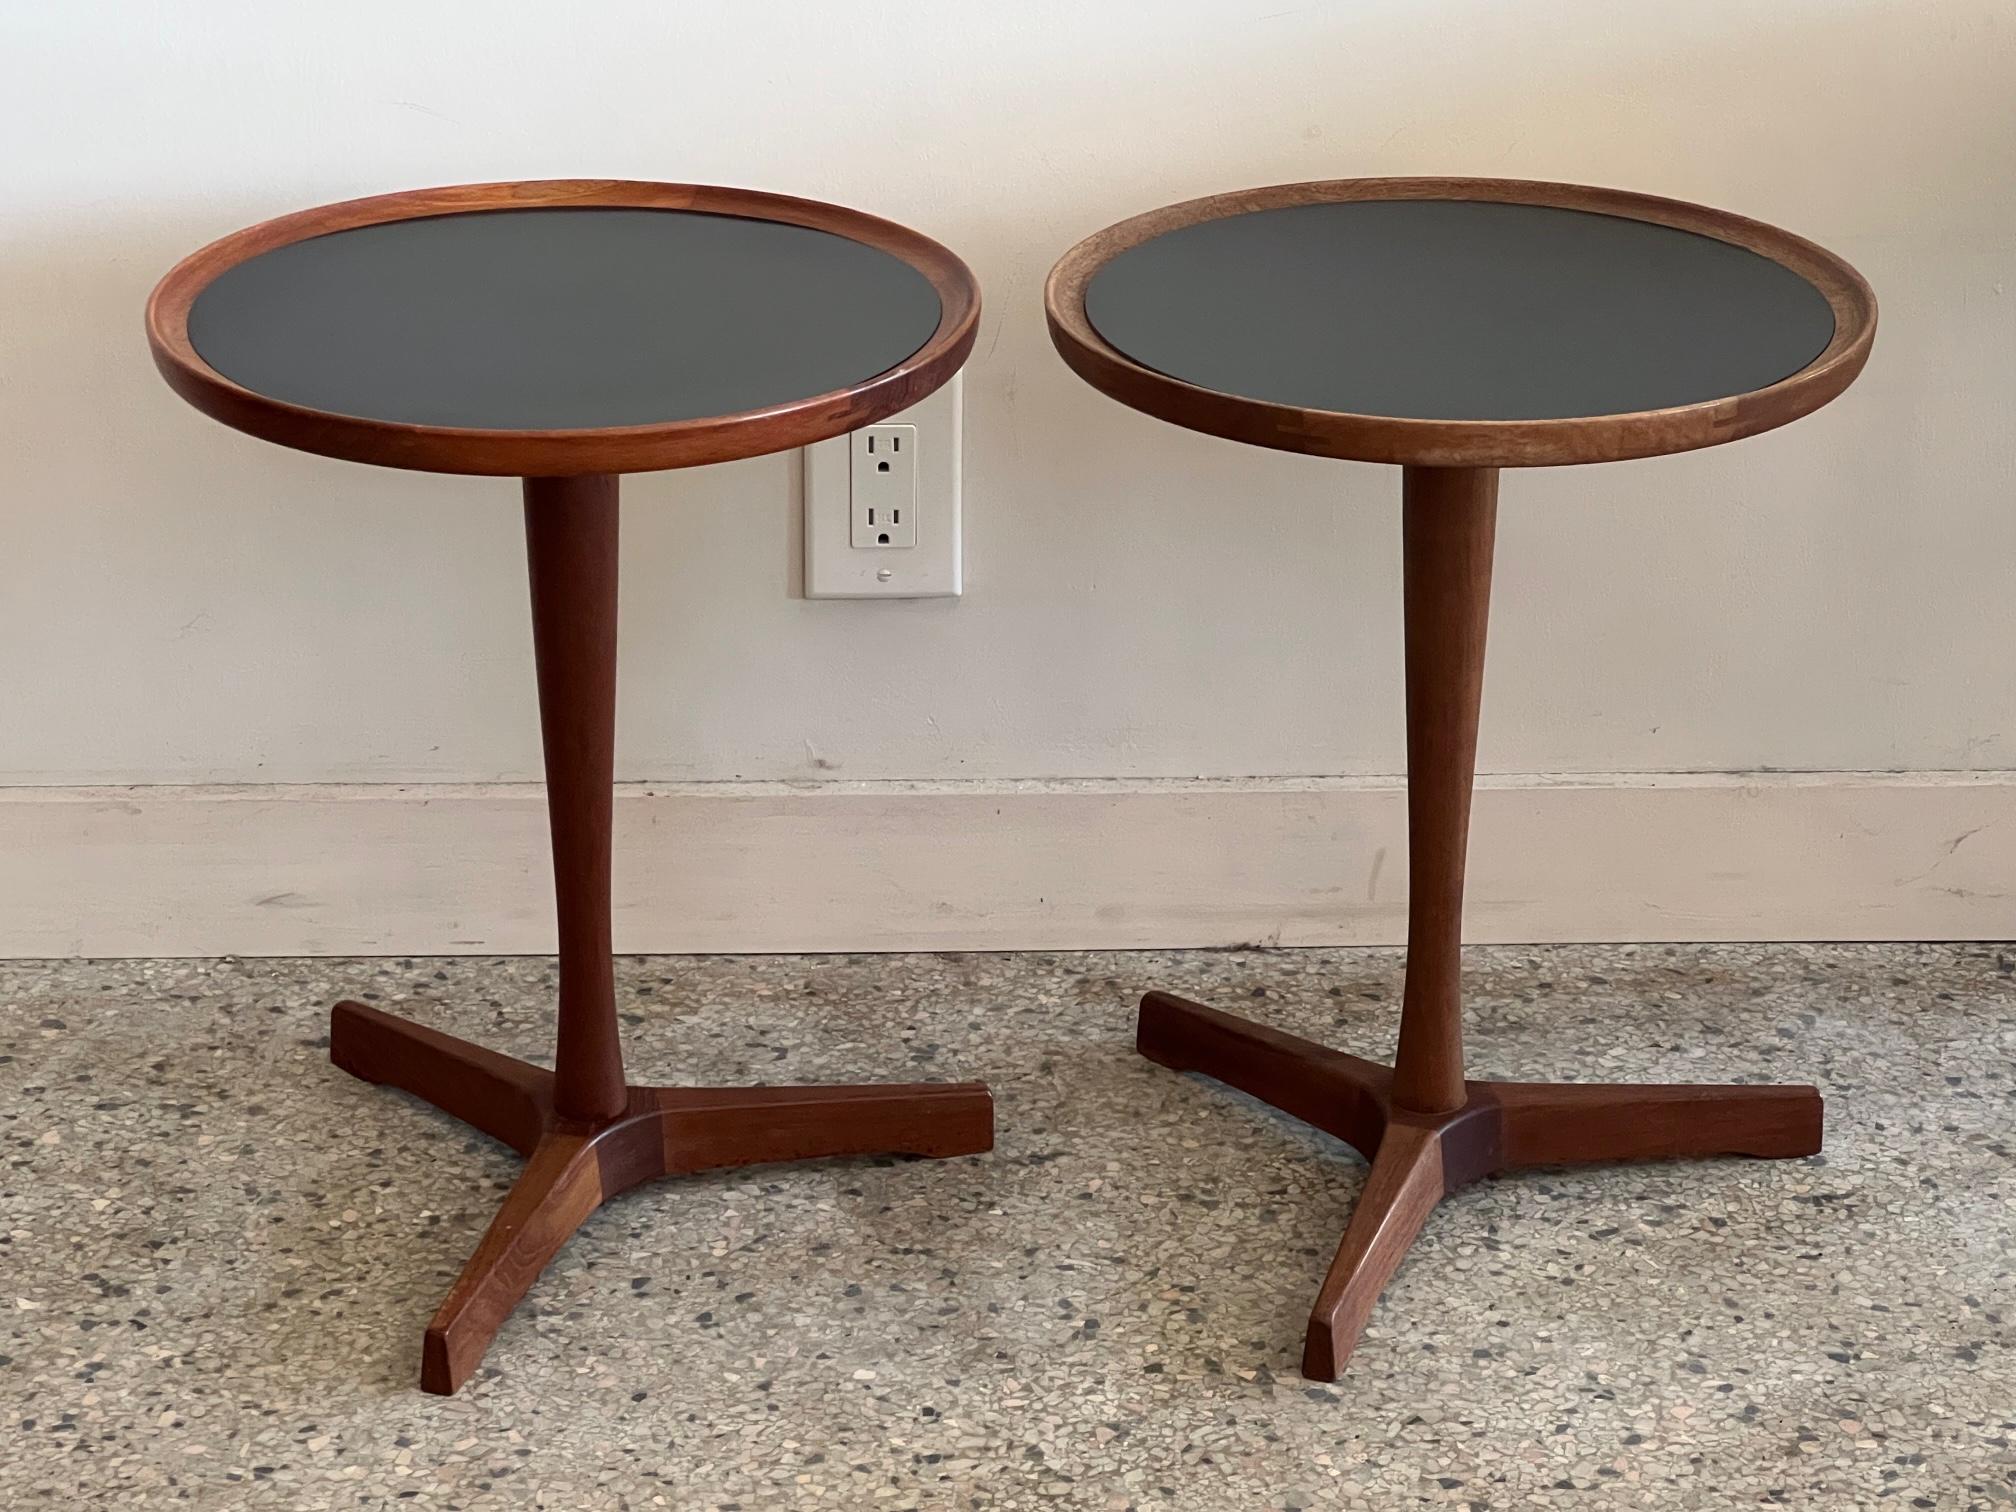 A great pair of Classic gueridons or occasional tables by Hans C. Andersen. Made in Denmark, circa 1960s, teak. The tops dismount for easier shipping. This version has the black laminate tops-both tables are signed.